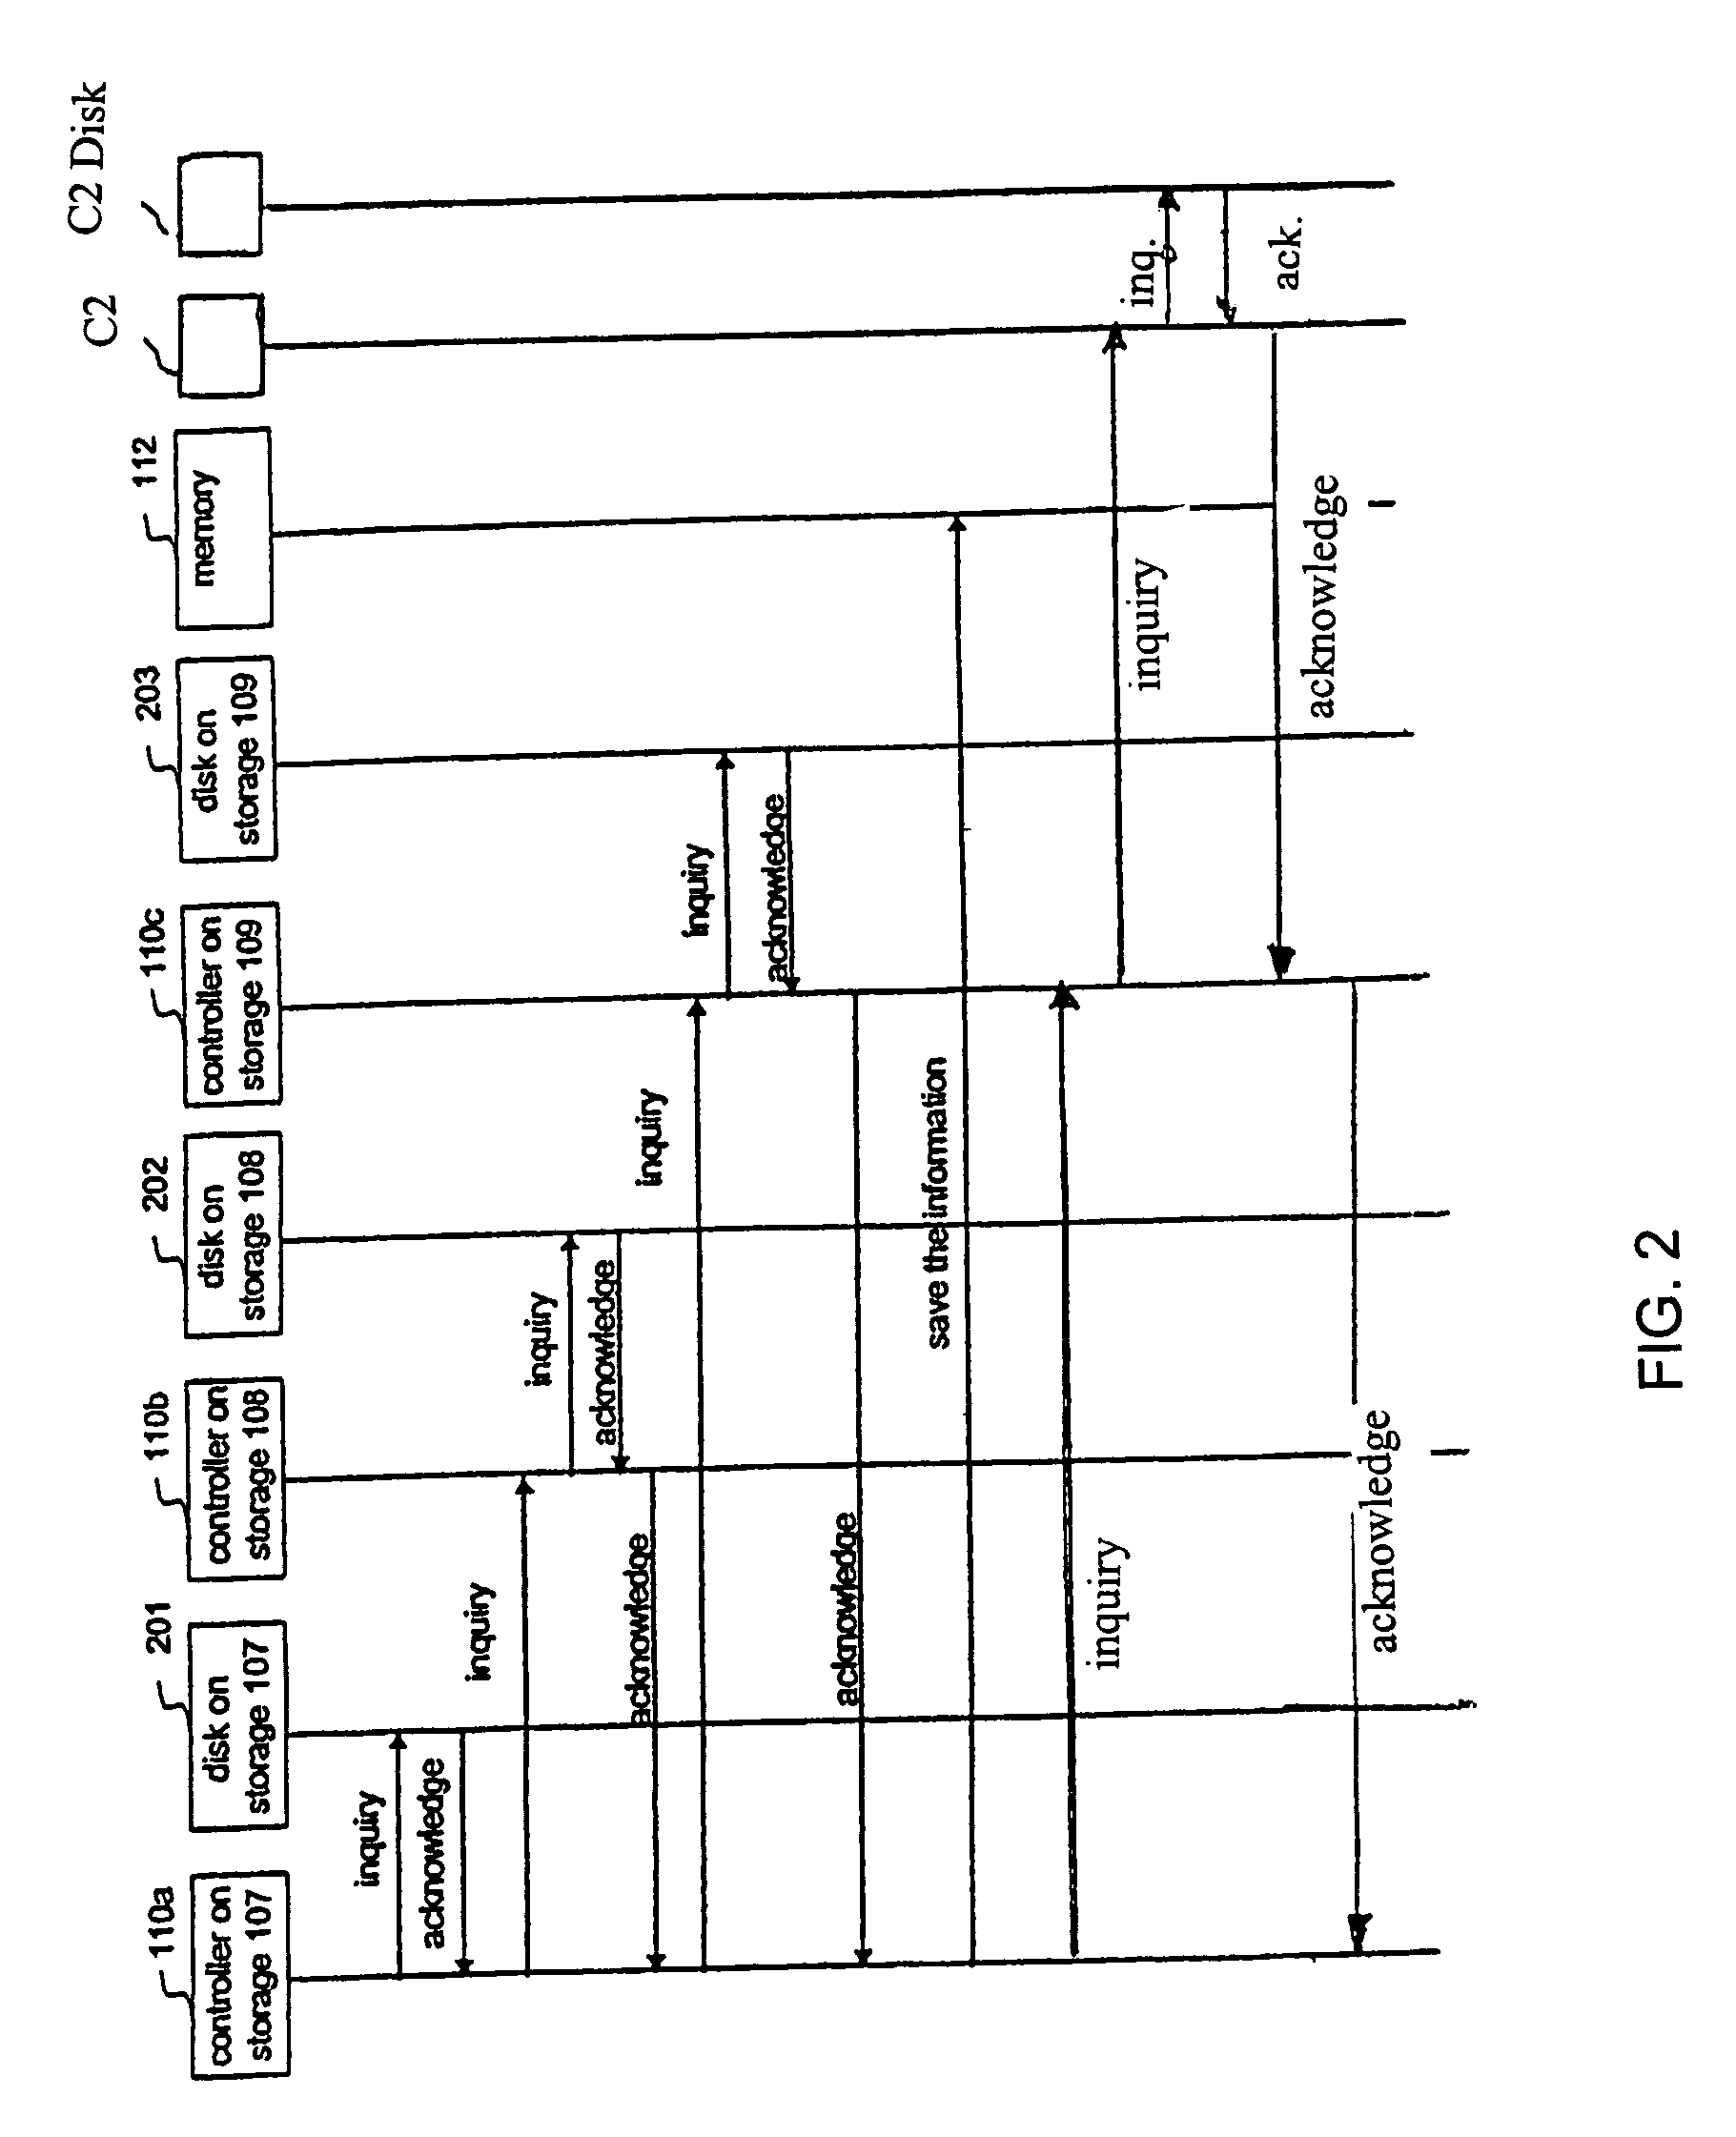 Method and apparatus for storage pooling and provisioning for journal based storage and recovery